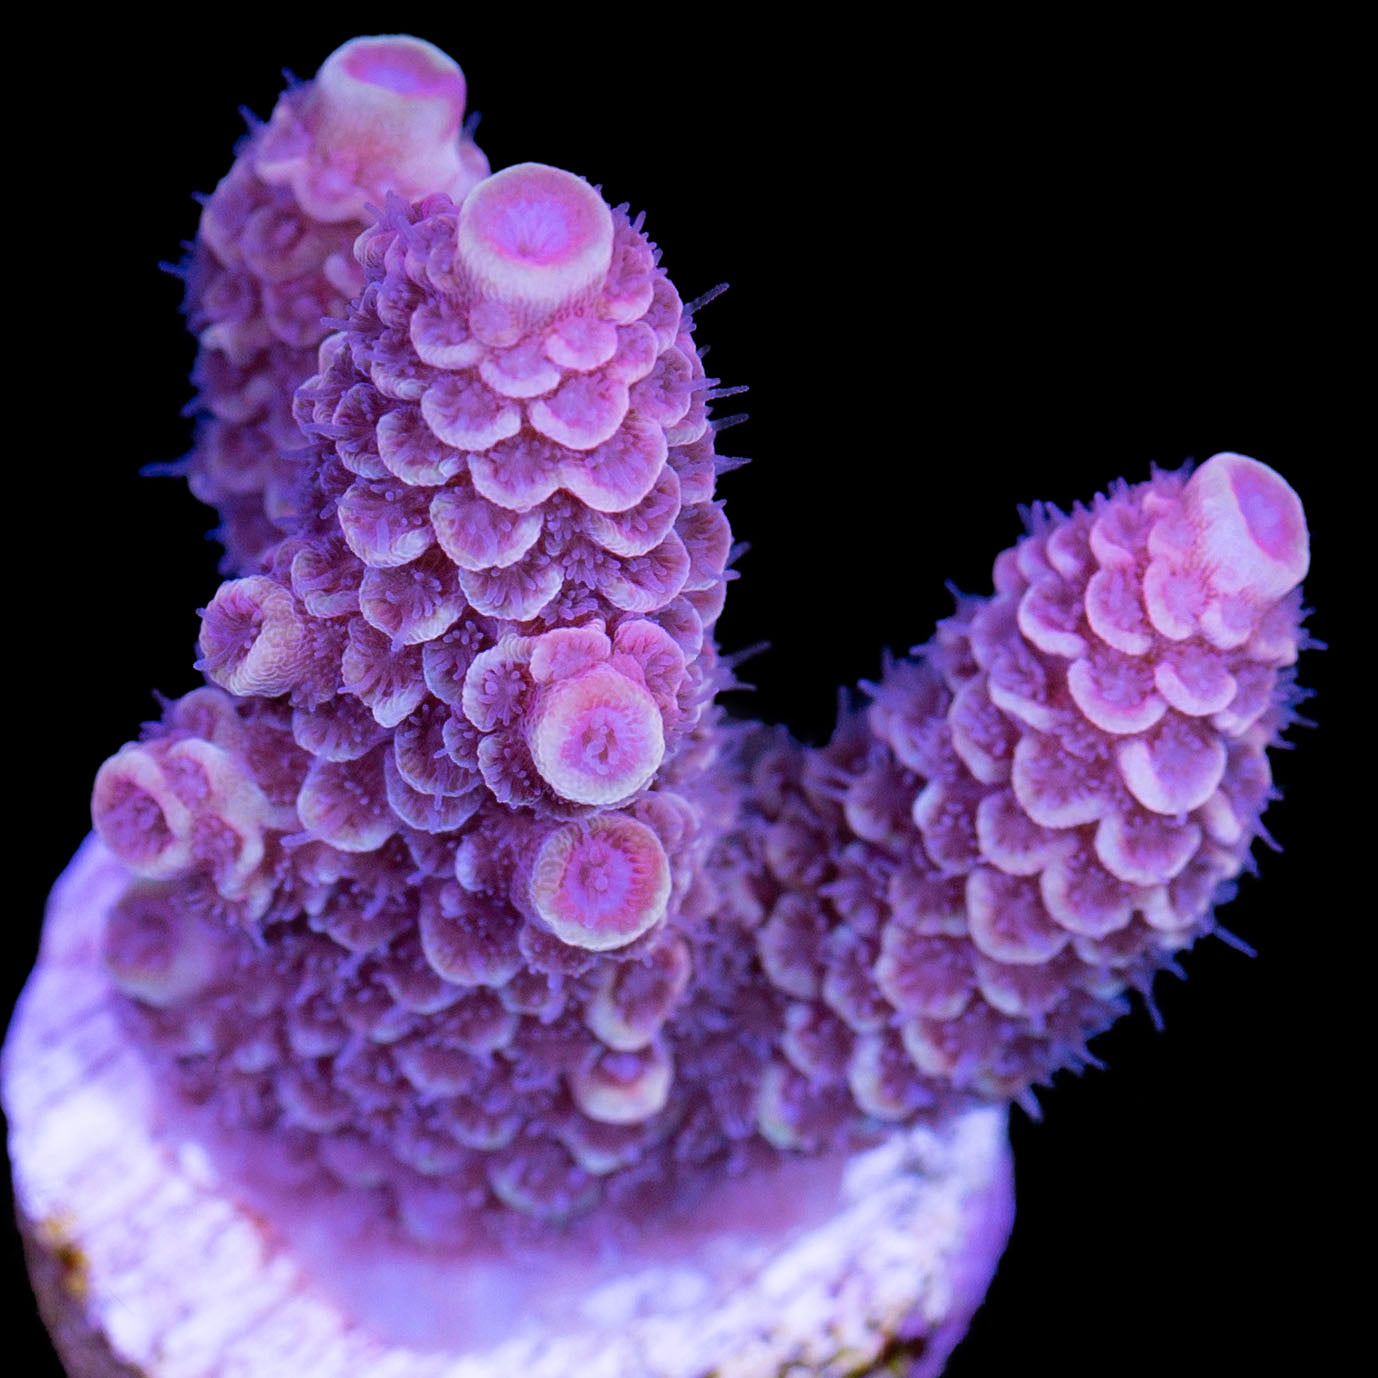 Pink Orchid Spathulata Acropora Coral